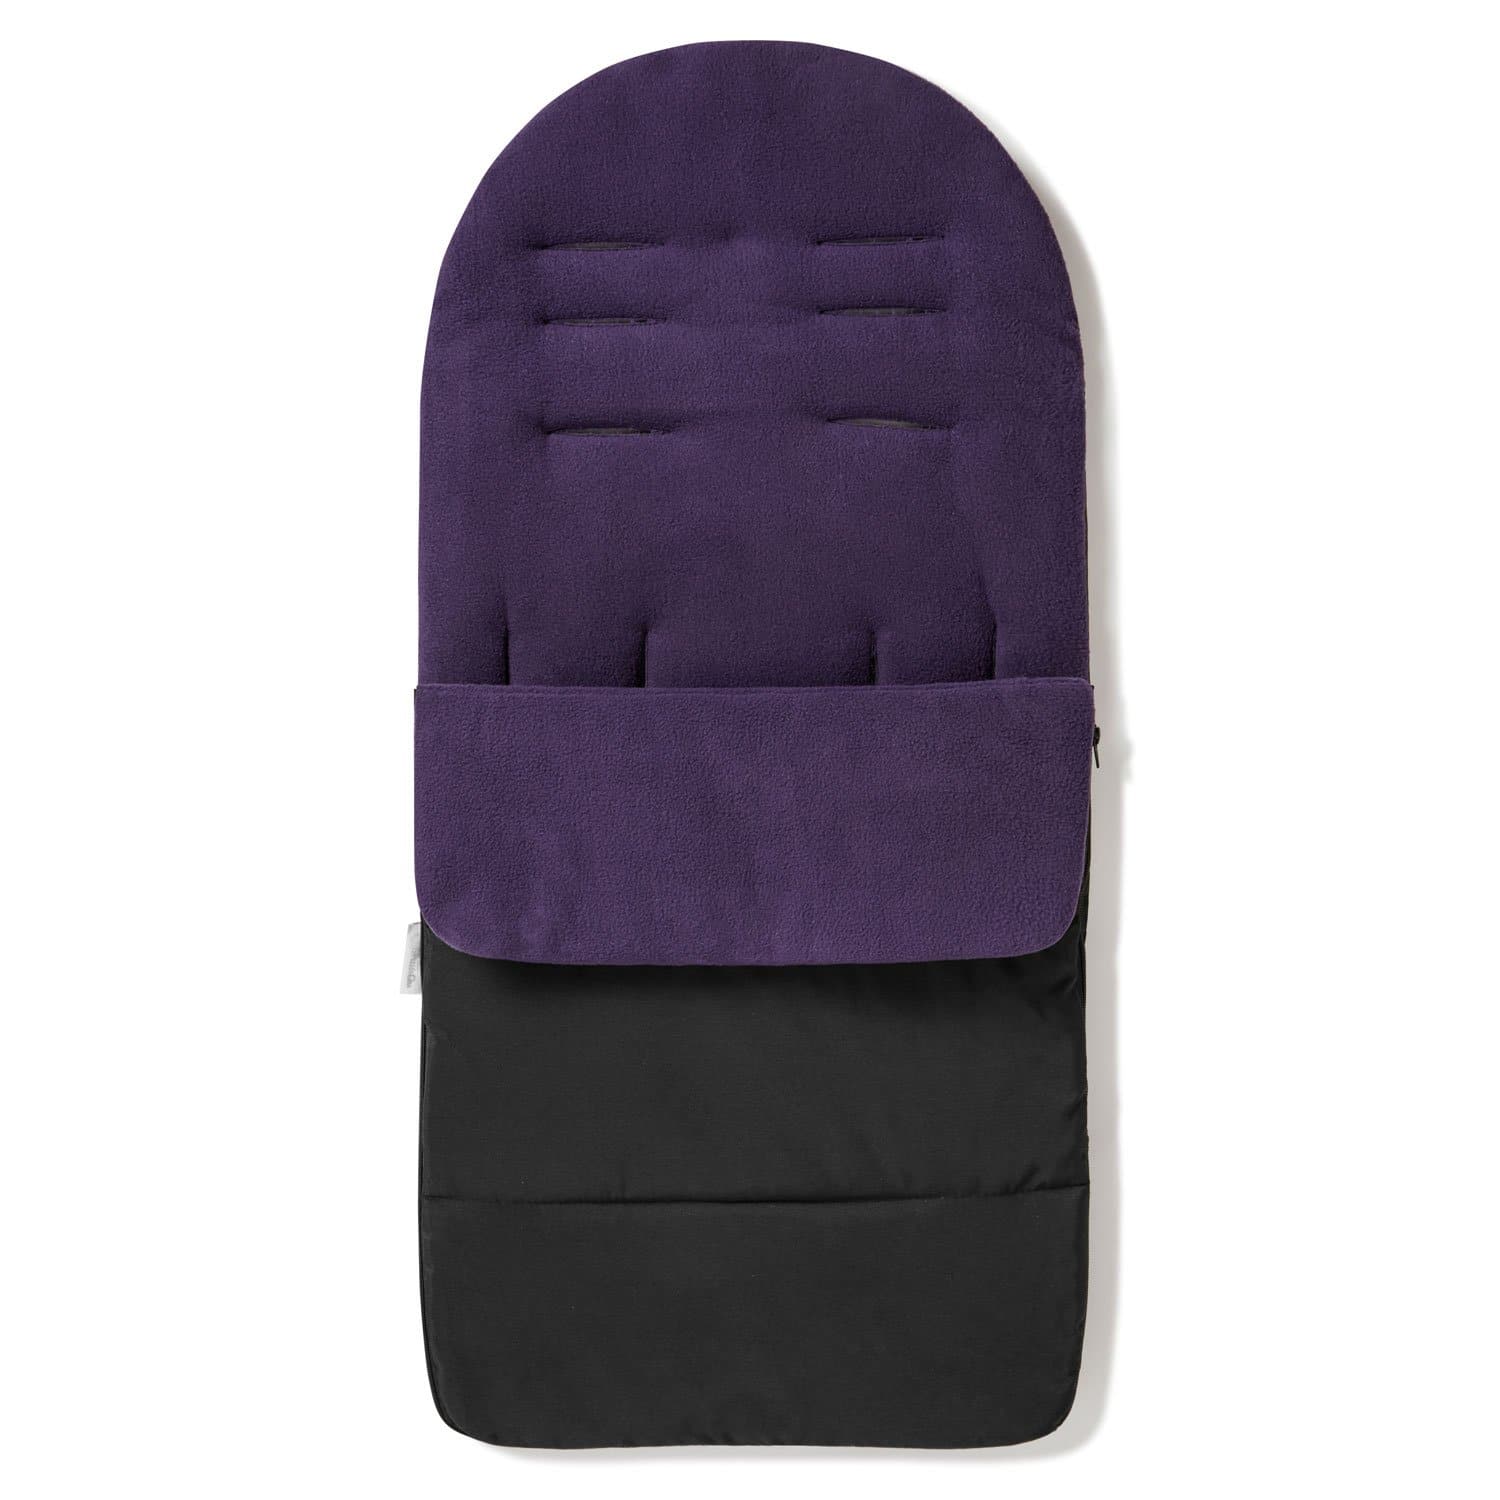 Universal Premium Pushchair Footmuff / Cosy Toes - Fits All Pushchairs / Prams And Buggies - Plum Purple / Fits All Models | For Your Little One